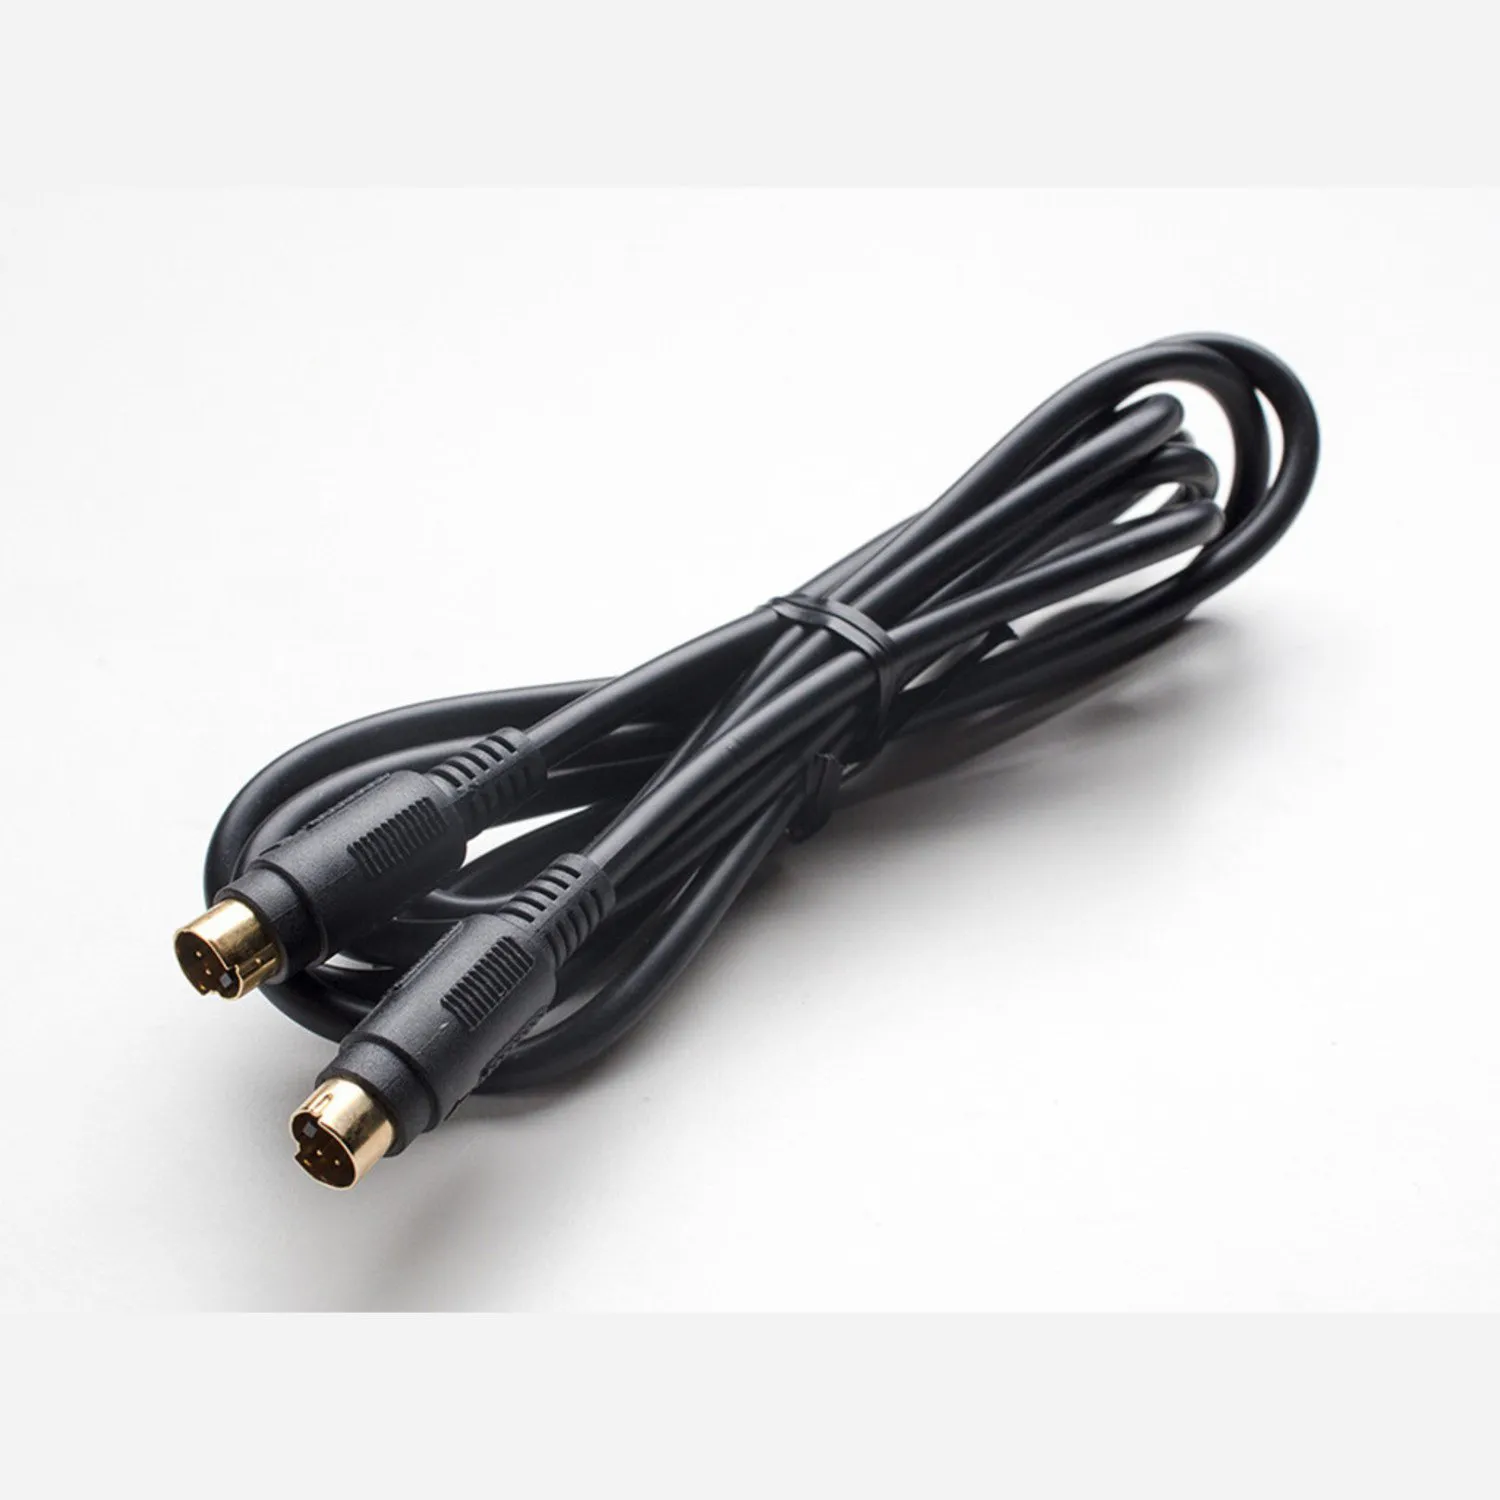 Photo of S-Video Cable - 6 feet